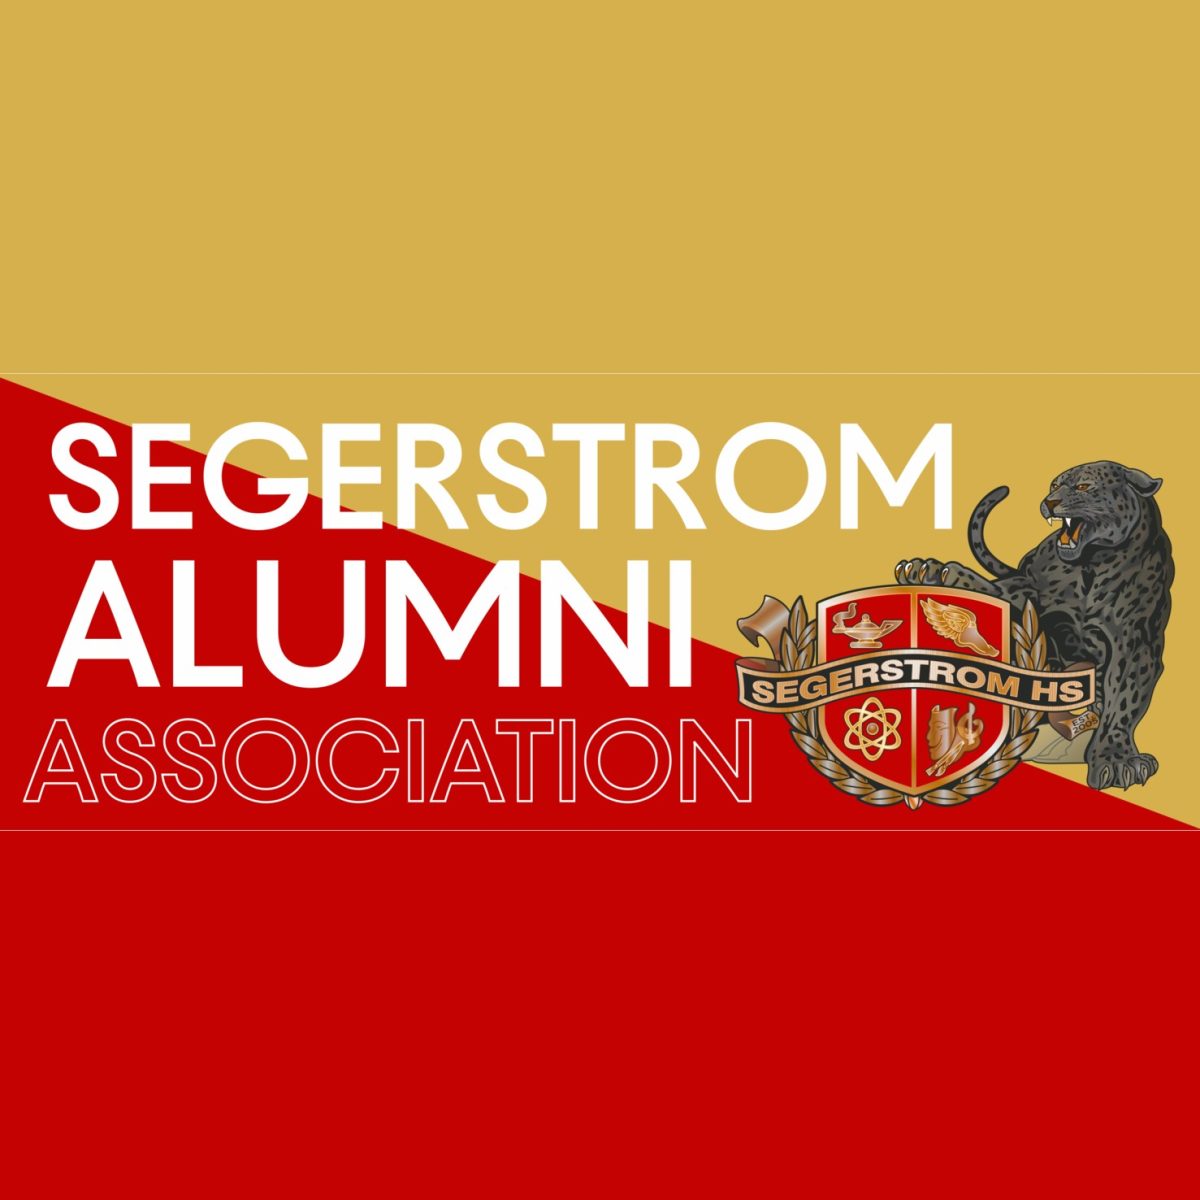 The+alumni+association+has+been+working+towards+connecting+alumni+throughout+the+2023-2024+year.